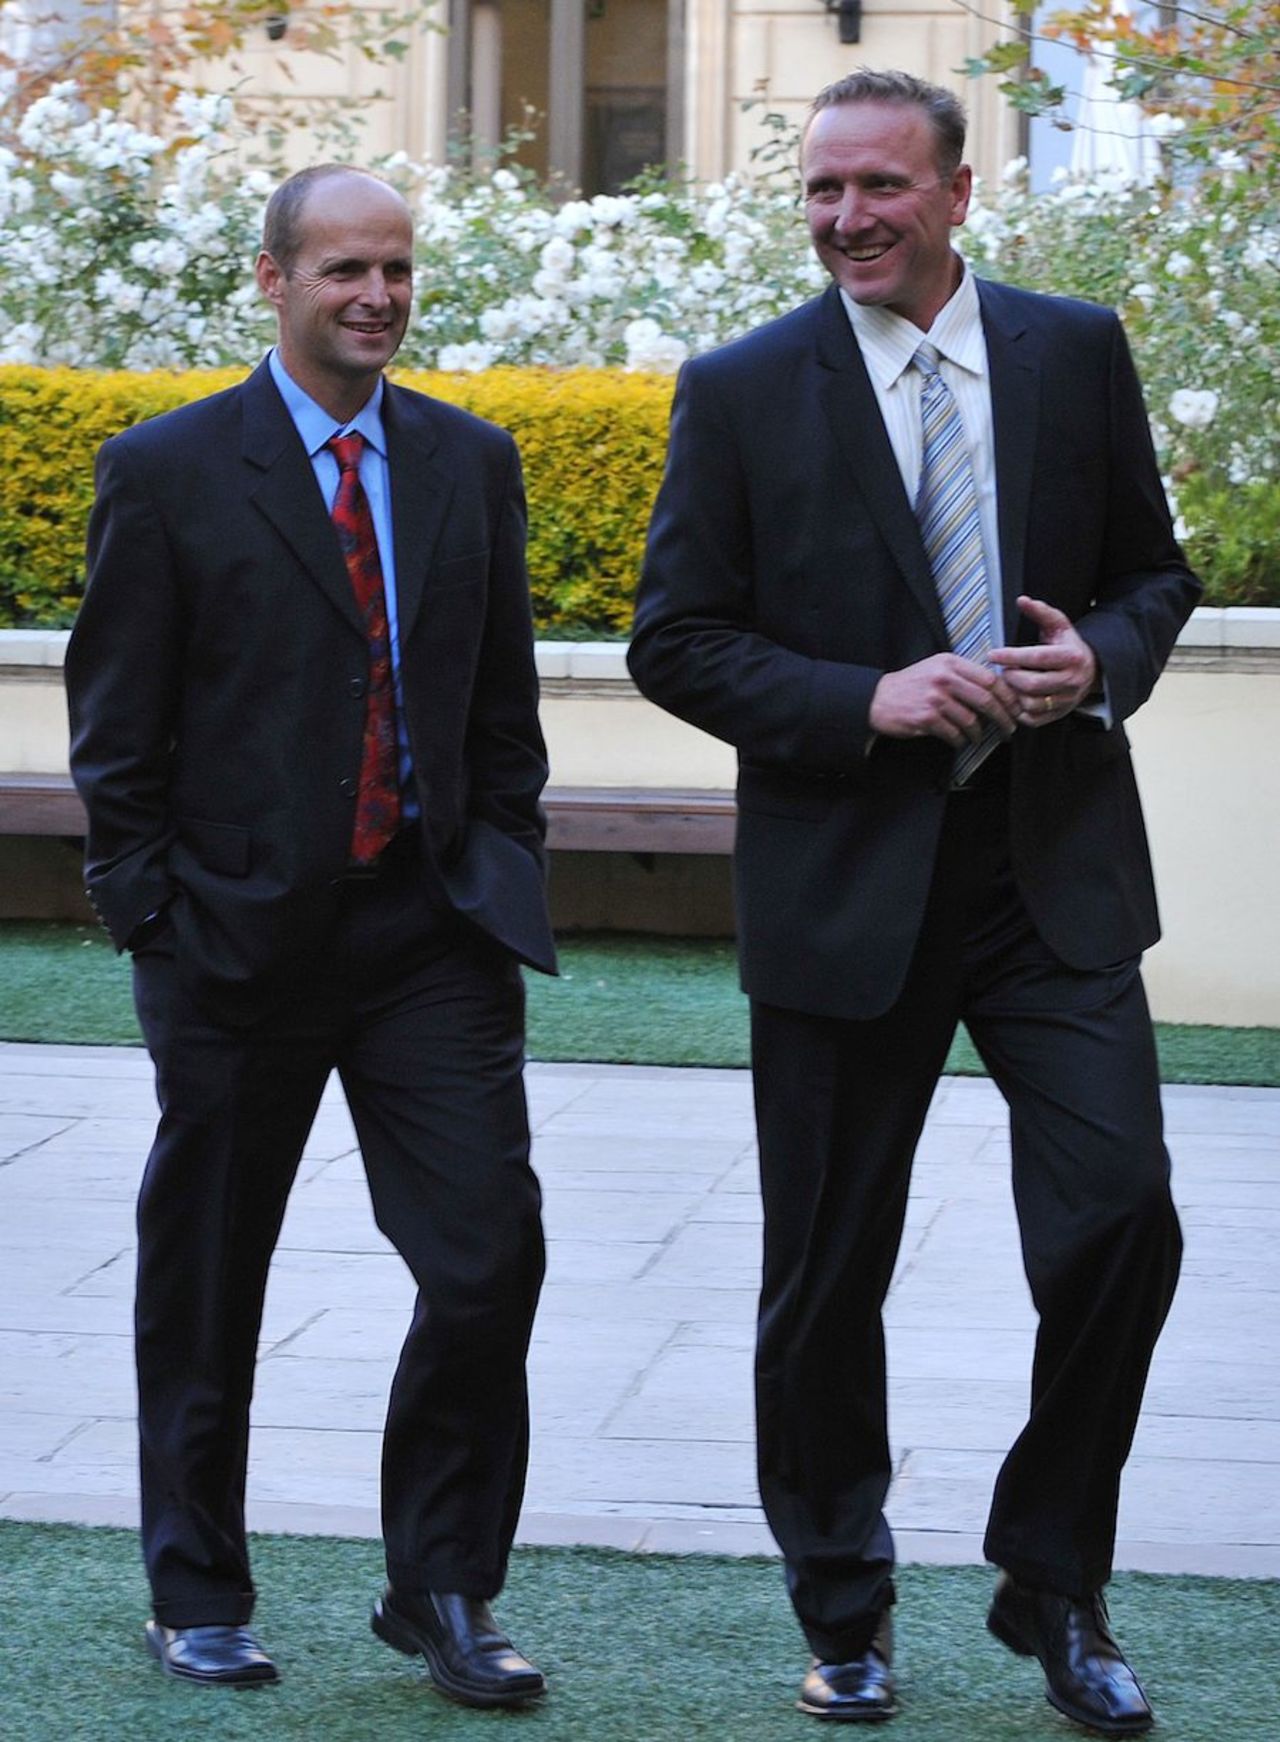 Gary Kirsten and Allan Donald arrive for a press conference, Johannesbug, June 6, 2011